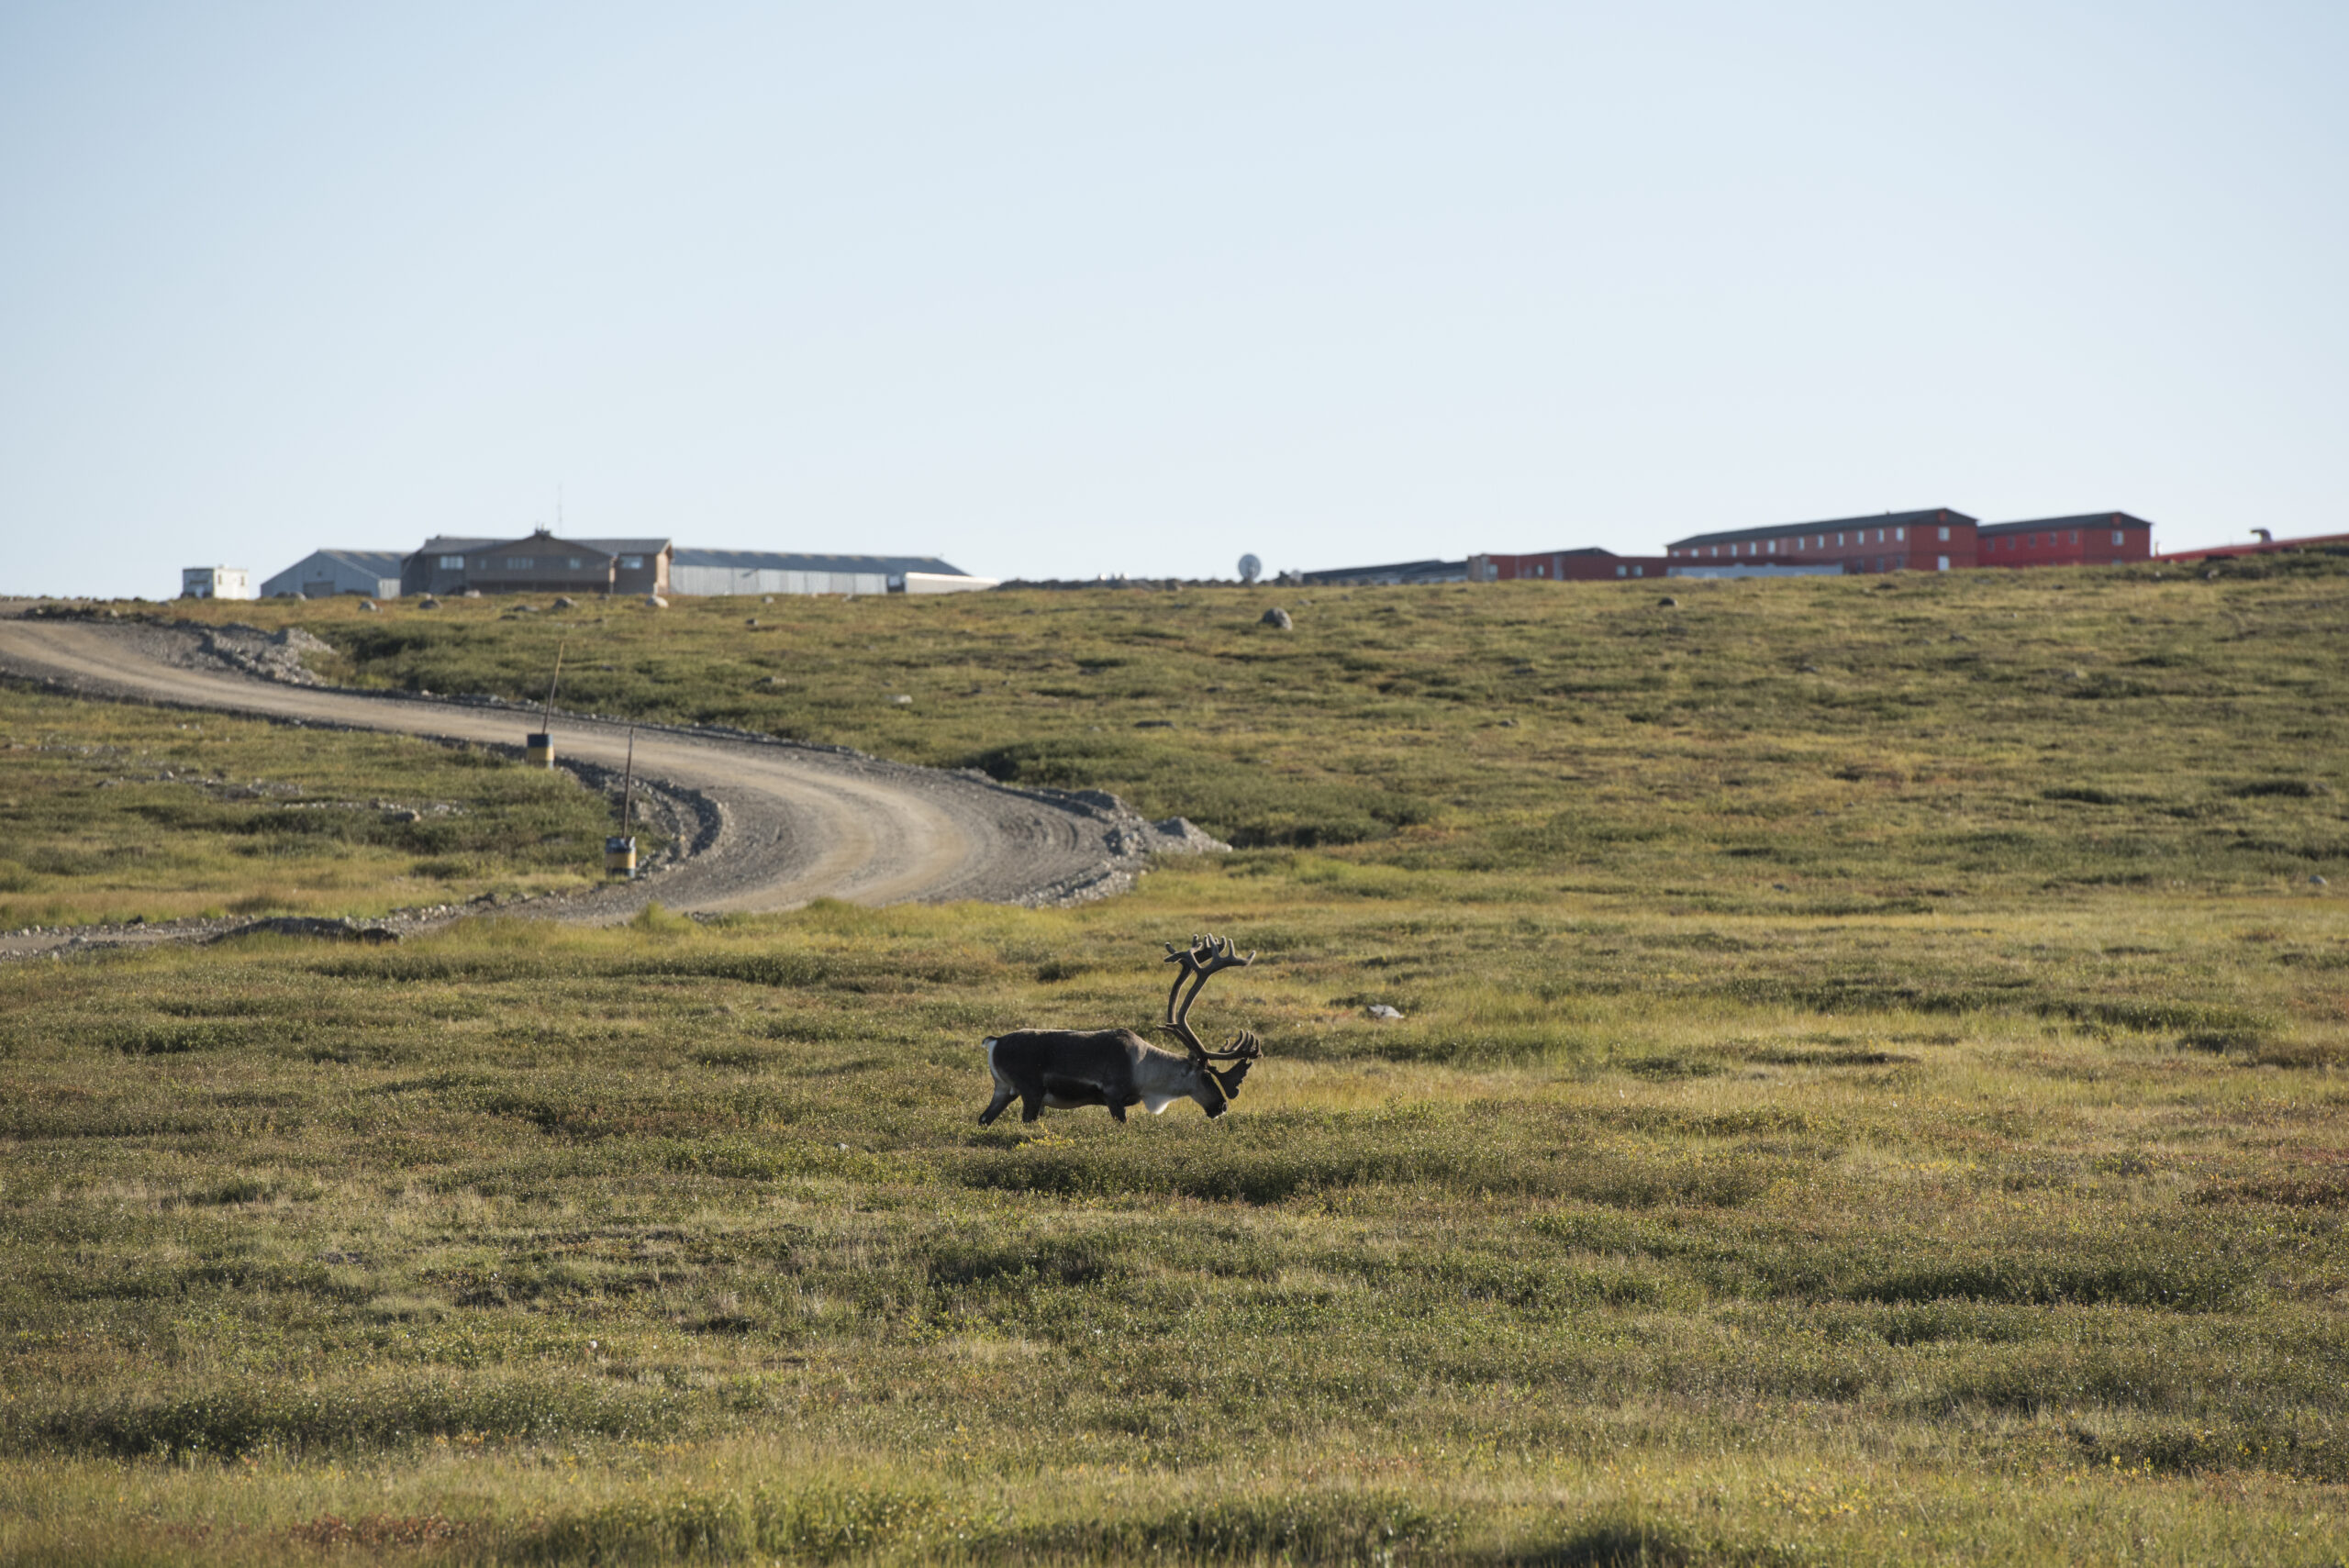 Northwest territories a lone barren-ground caribou walks across a grassy landscape, buildings in the background